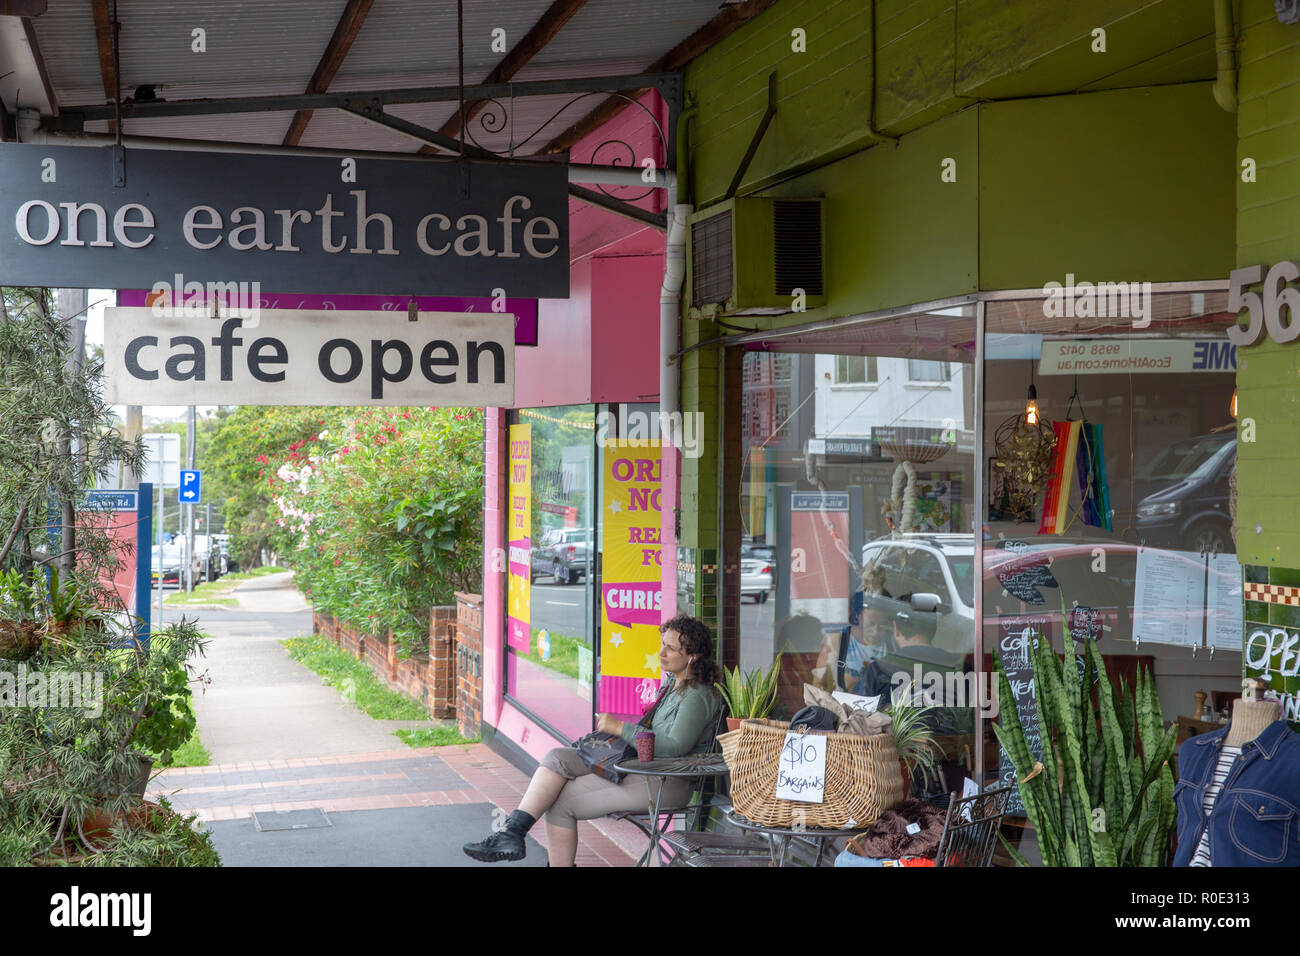 Lady sitting outside One earth cafe in Willoughby,Sydney,Australia Stock Photo